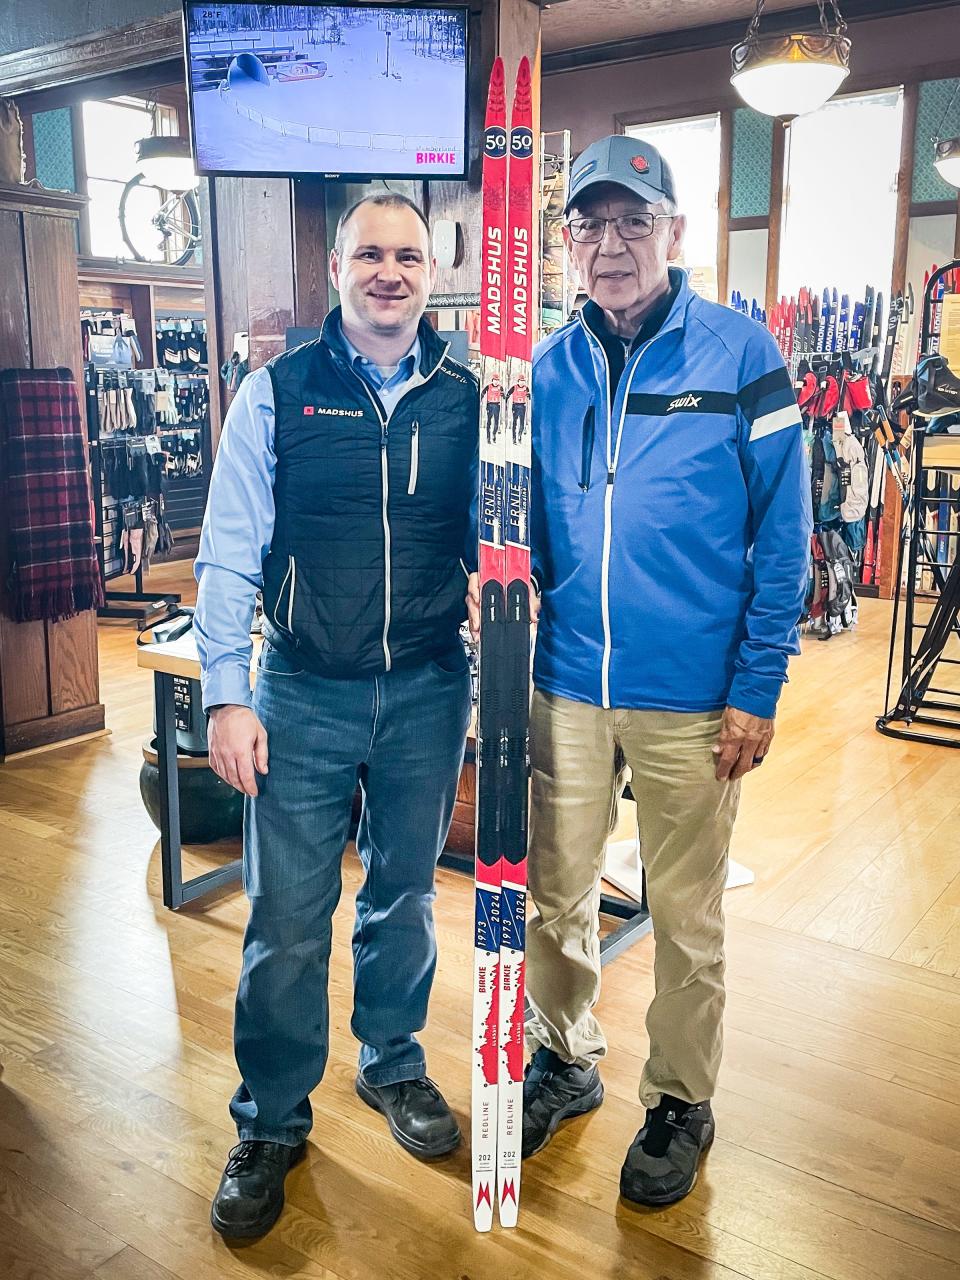 Ernie St. Germaine, right, is presented with a pair of custom skis commemorating his 50th Birkebeiner by Madshus representative Ben Dubay on at Riverbrook Bike & Ski in Hayward.